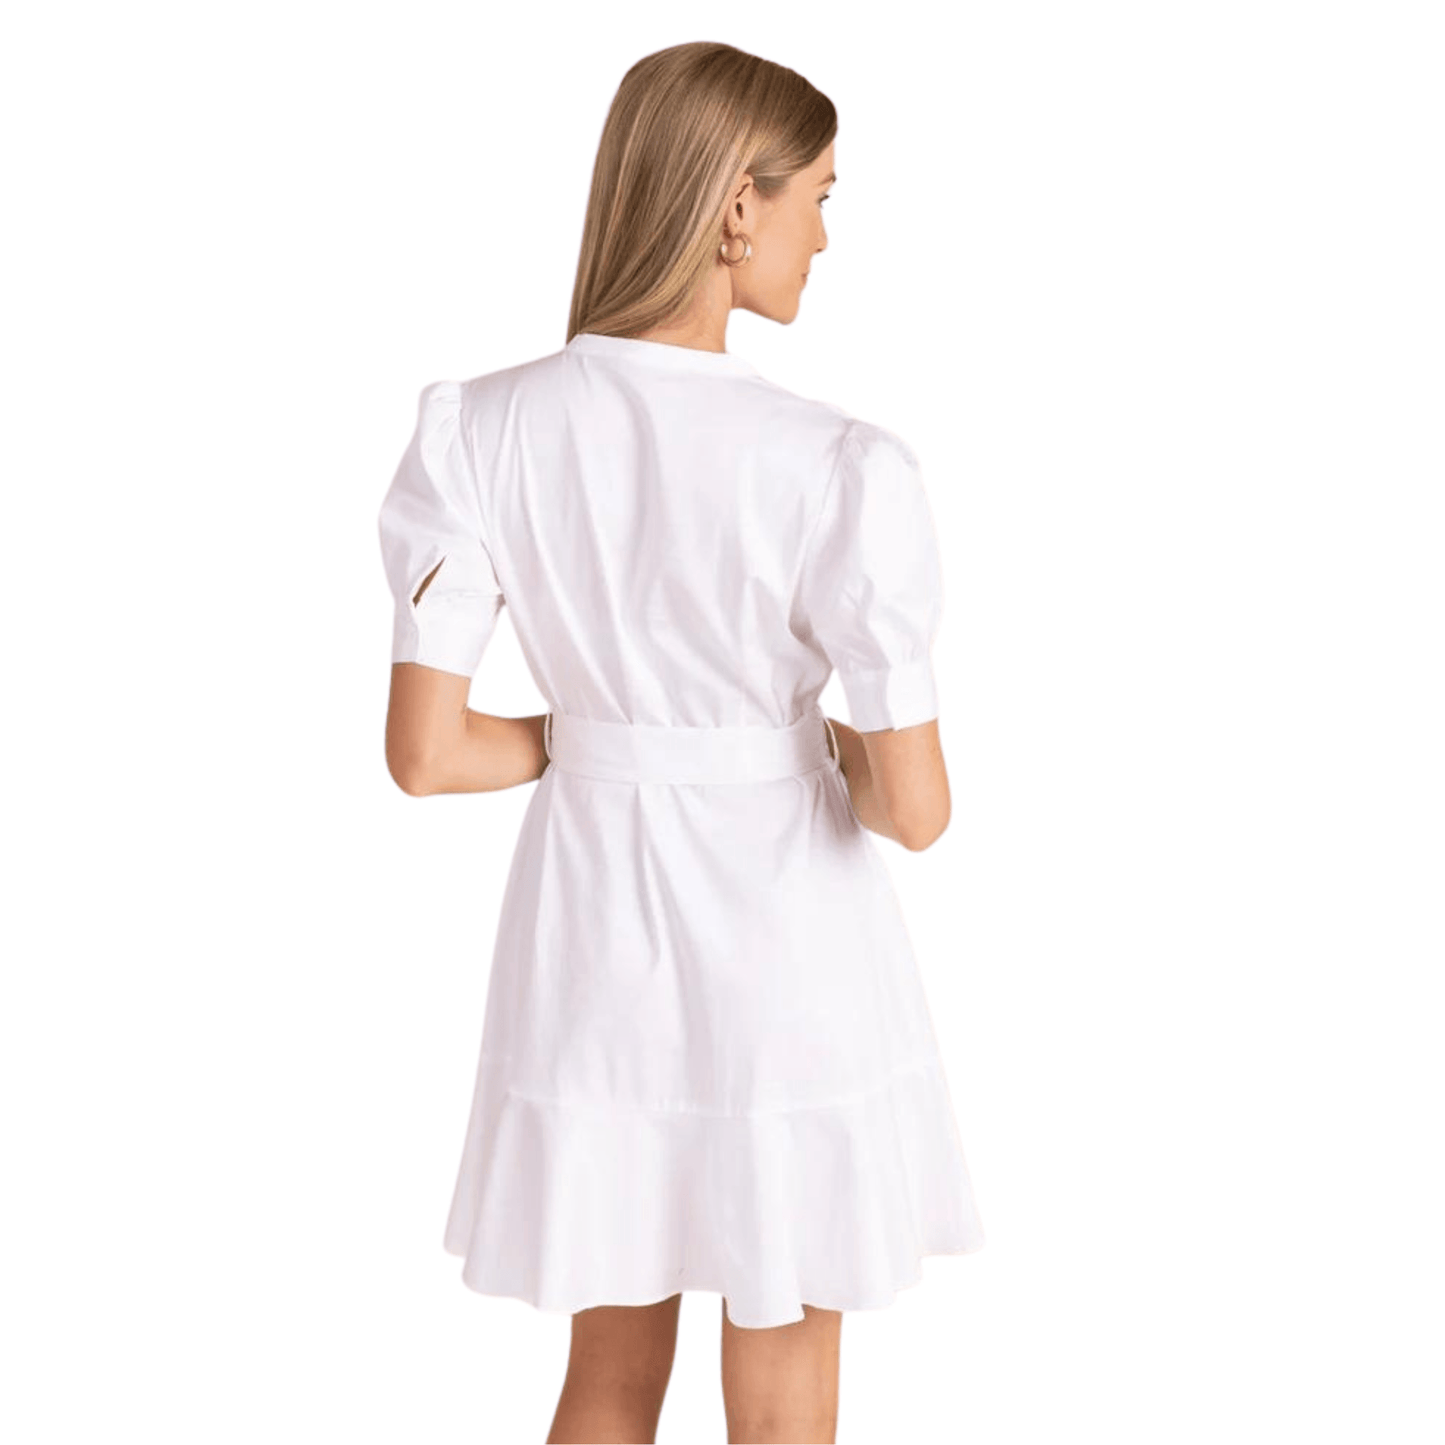 Analeise Dress in White - Fairley Fancy 